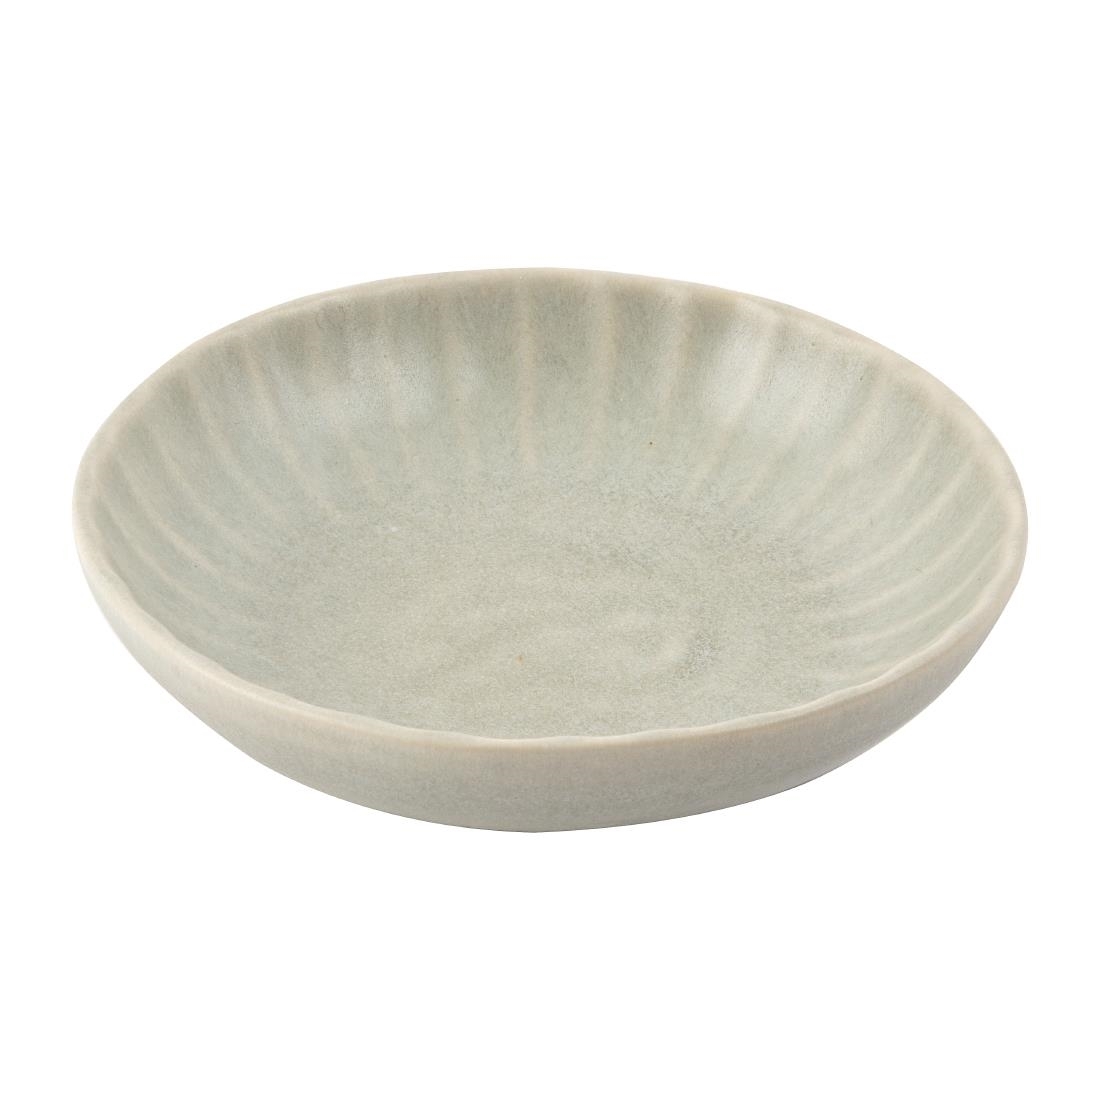 Olympia Corallite Deep Bowls Concrete Grey 160mm (Pack of 6)